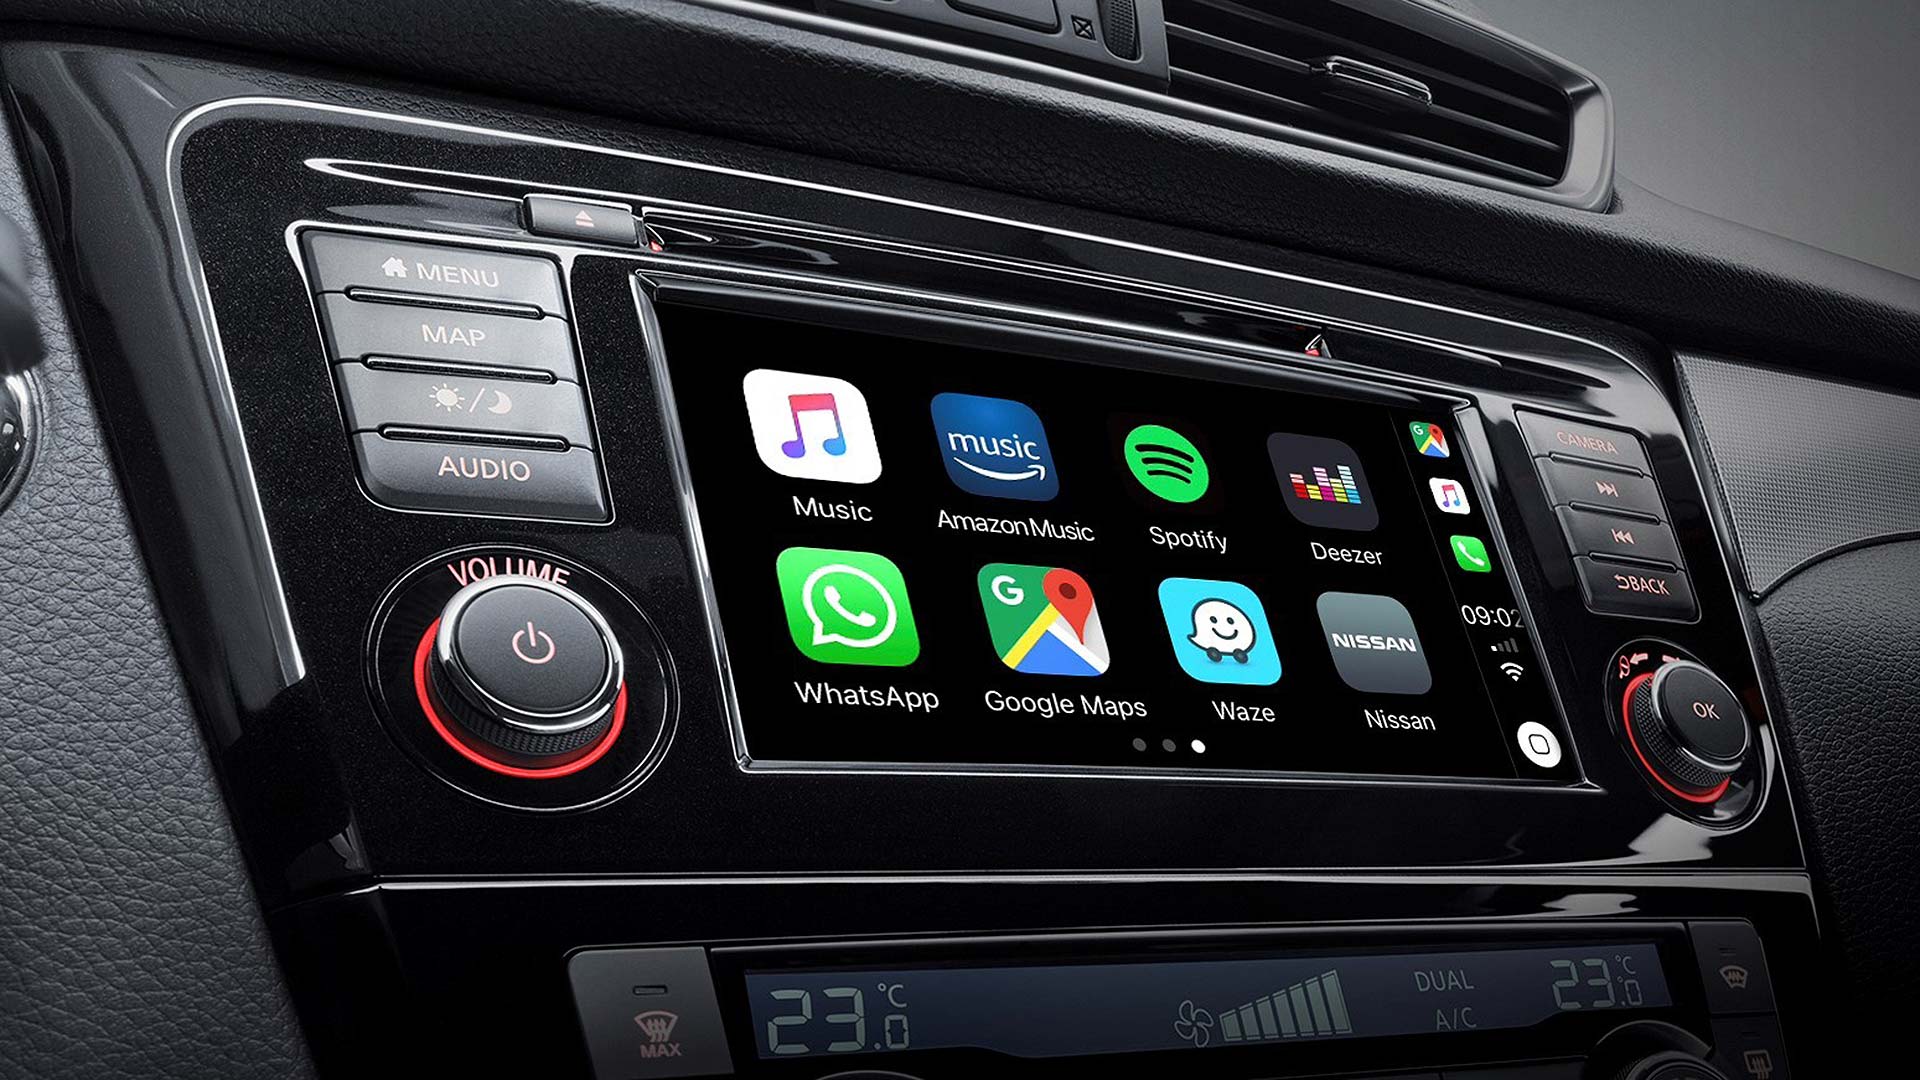 2019 Nissan Connect infotainment with Apple CarPlay